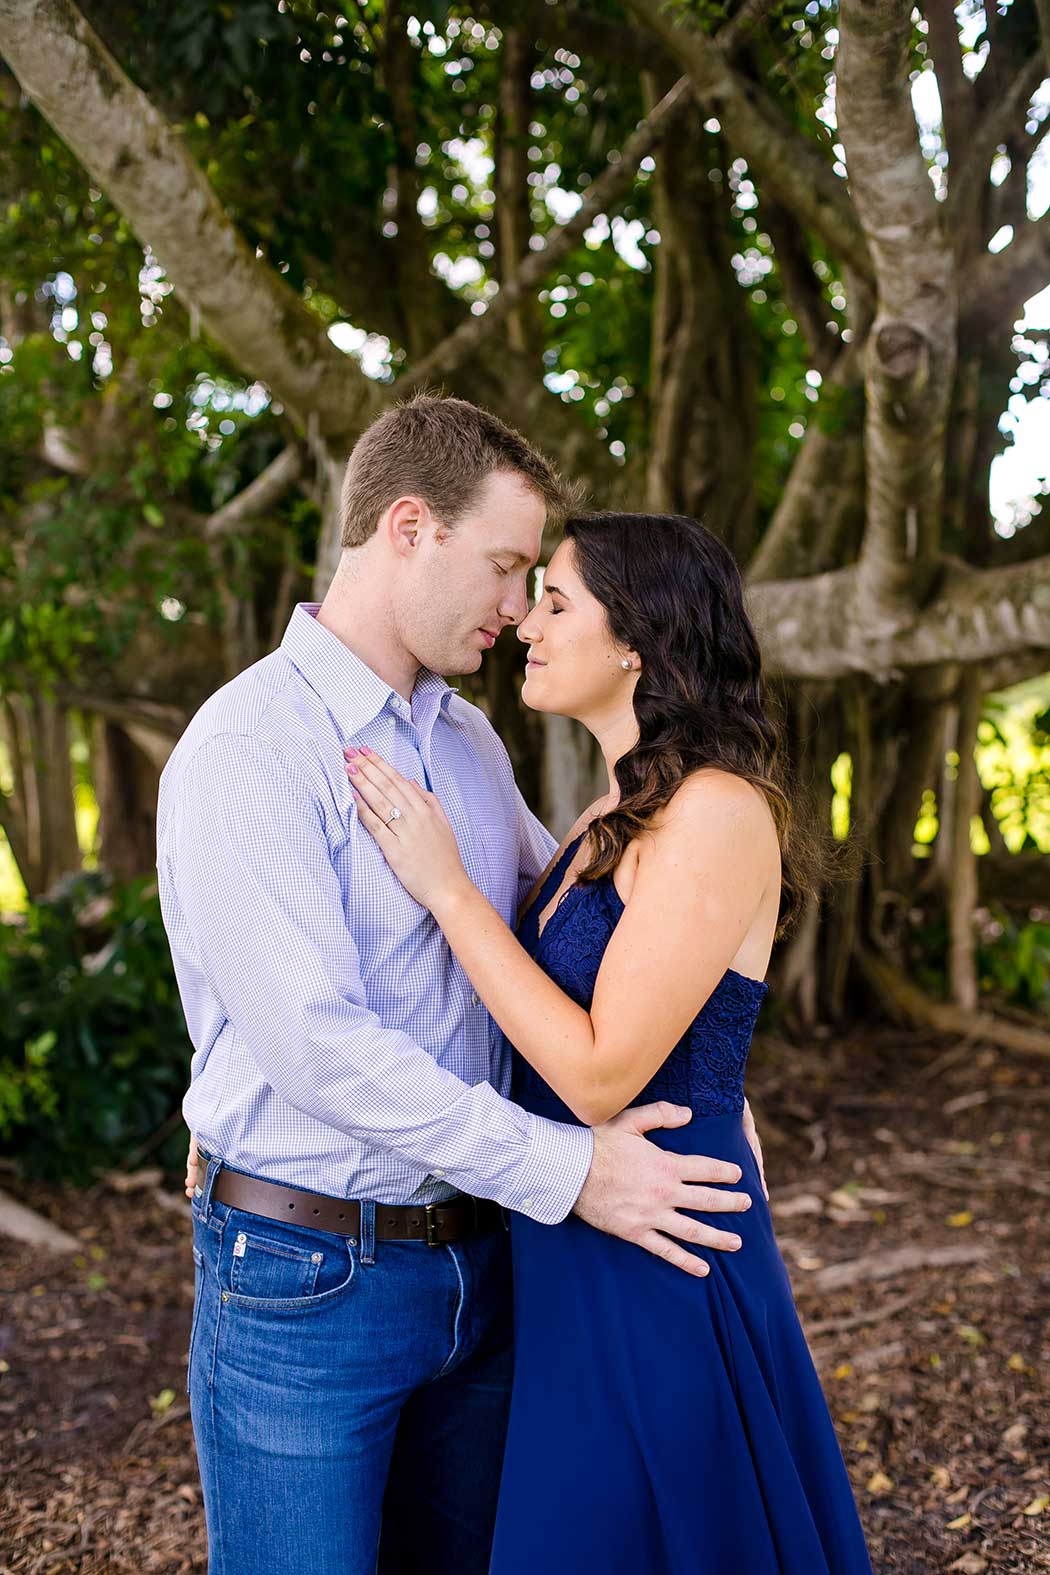 unique fun picture of engagement session in park with large tree | engagement photographer fort lauderdale | south florida engagement photography in robbins preserve davie | elegant engagement session photos fort lauderdaley